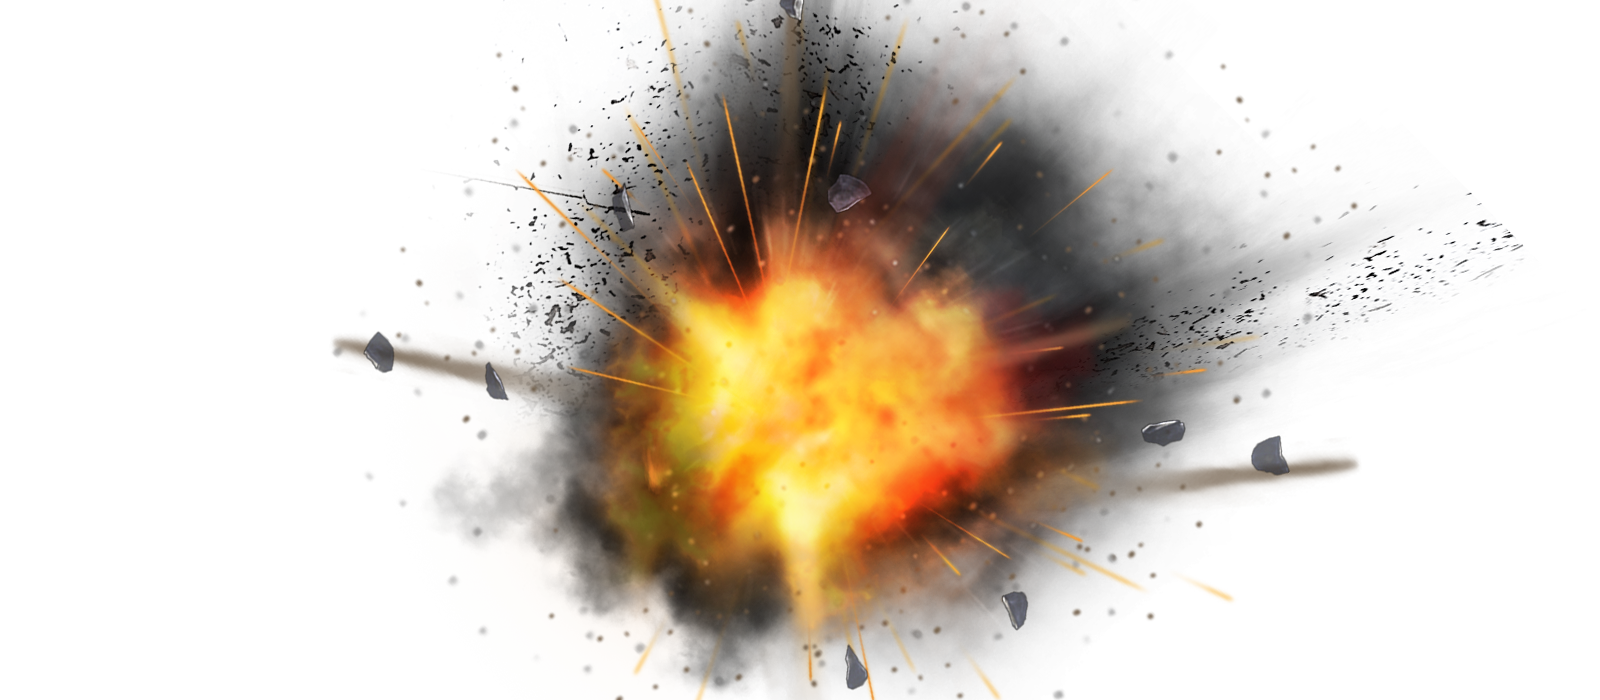 Drawn explosion background pn